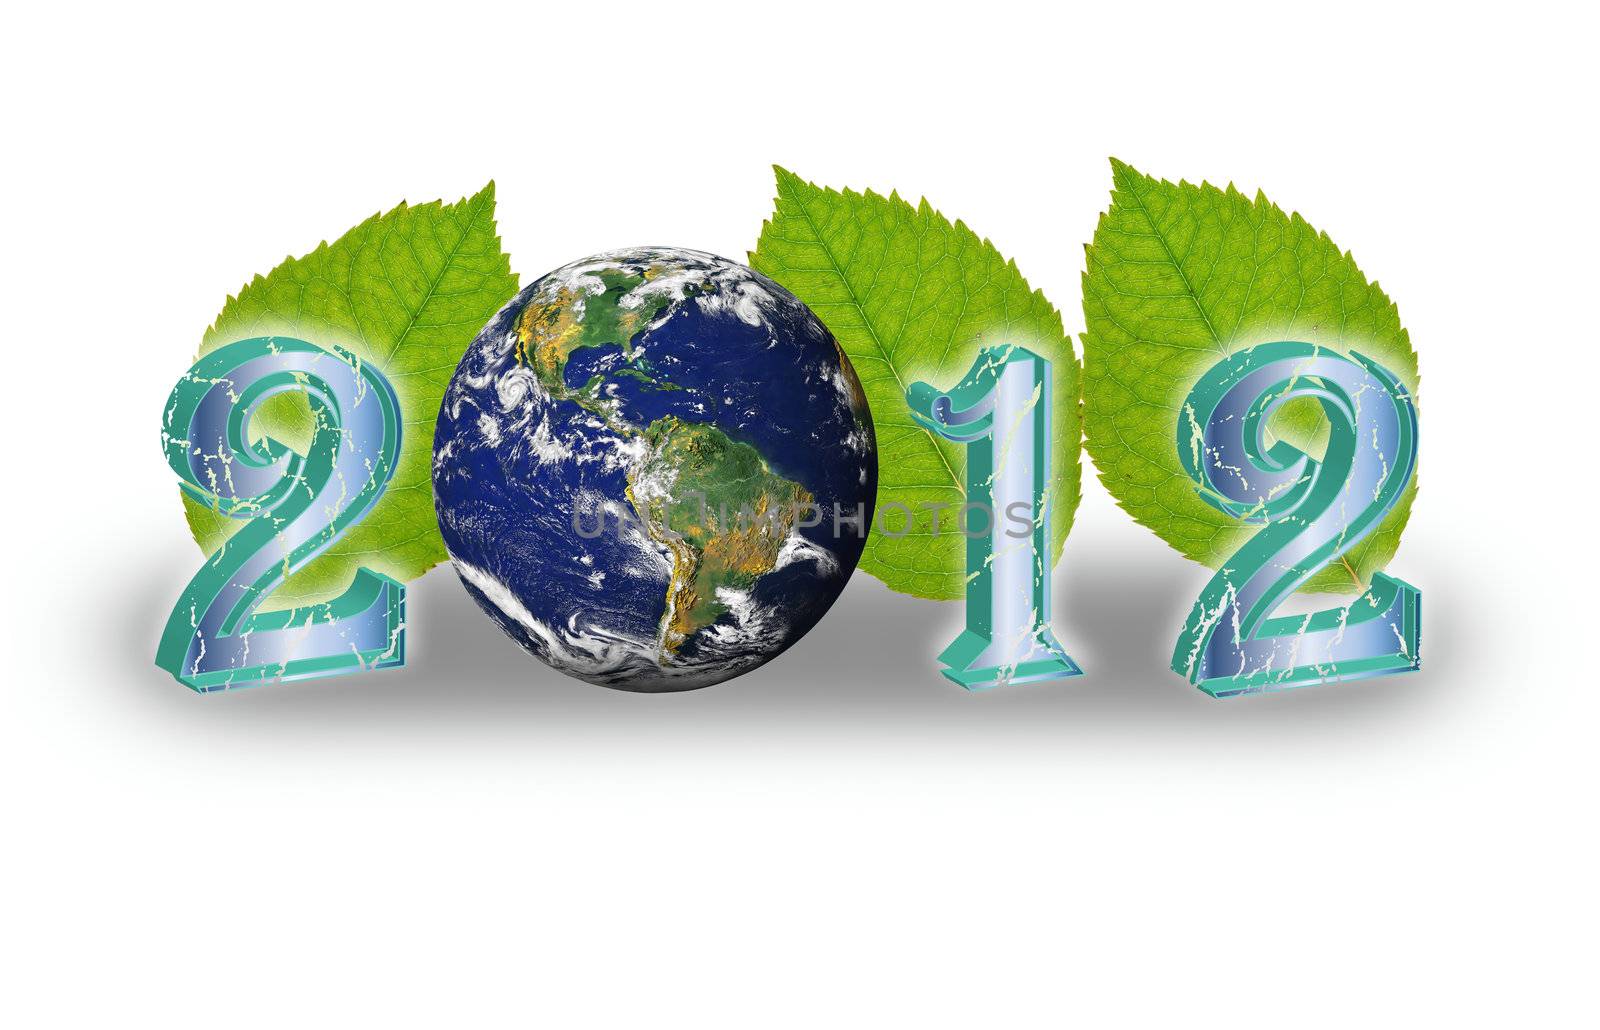 Creative 2012 New Year concept with blue Earth globe isolated by rufous